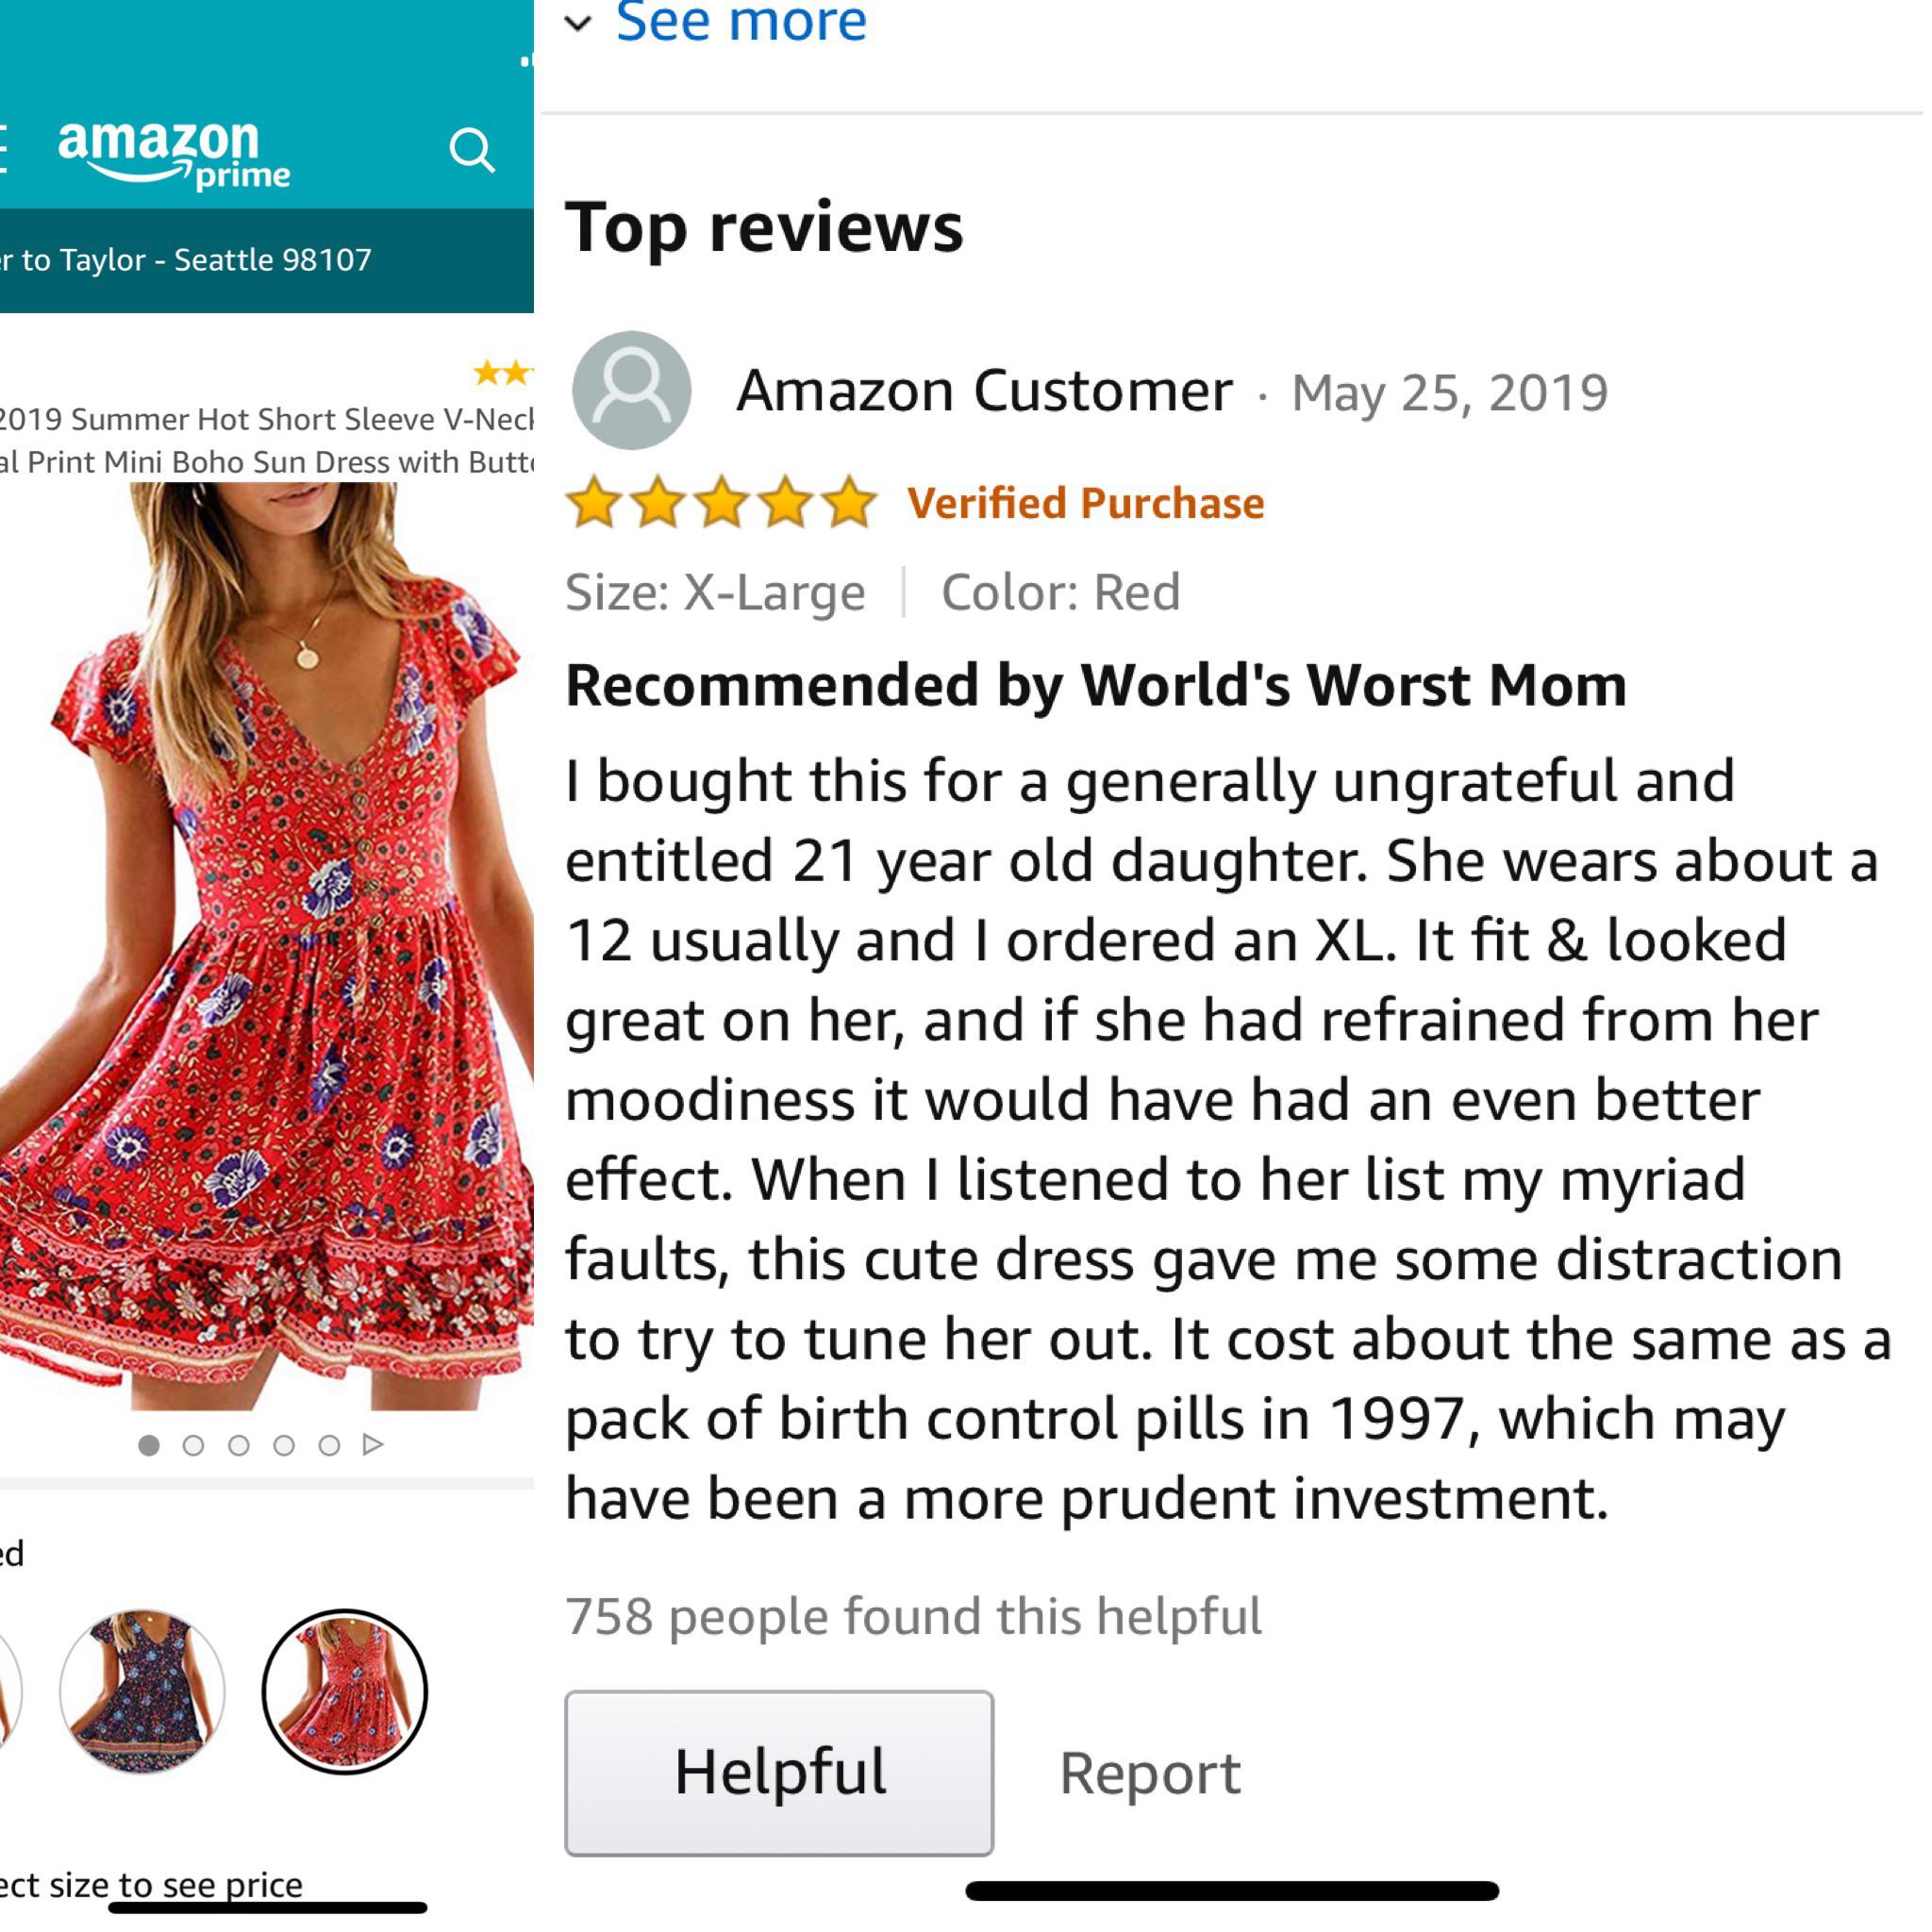 dress - See more amazon prime amazomea Top reviews Er to Taylor Seattle 98107 @ Amazon Customer 2019 Summer Hot Short Sleeve VNec! al Print Mini Boho Sun Dress with Butti V Verified Purchase Size XLarge Color Red Recommended by World's Worst Mom I bought